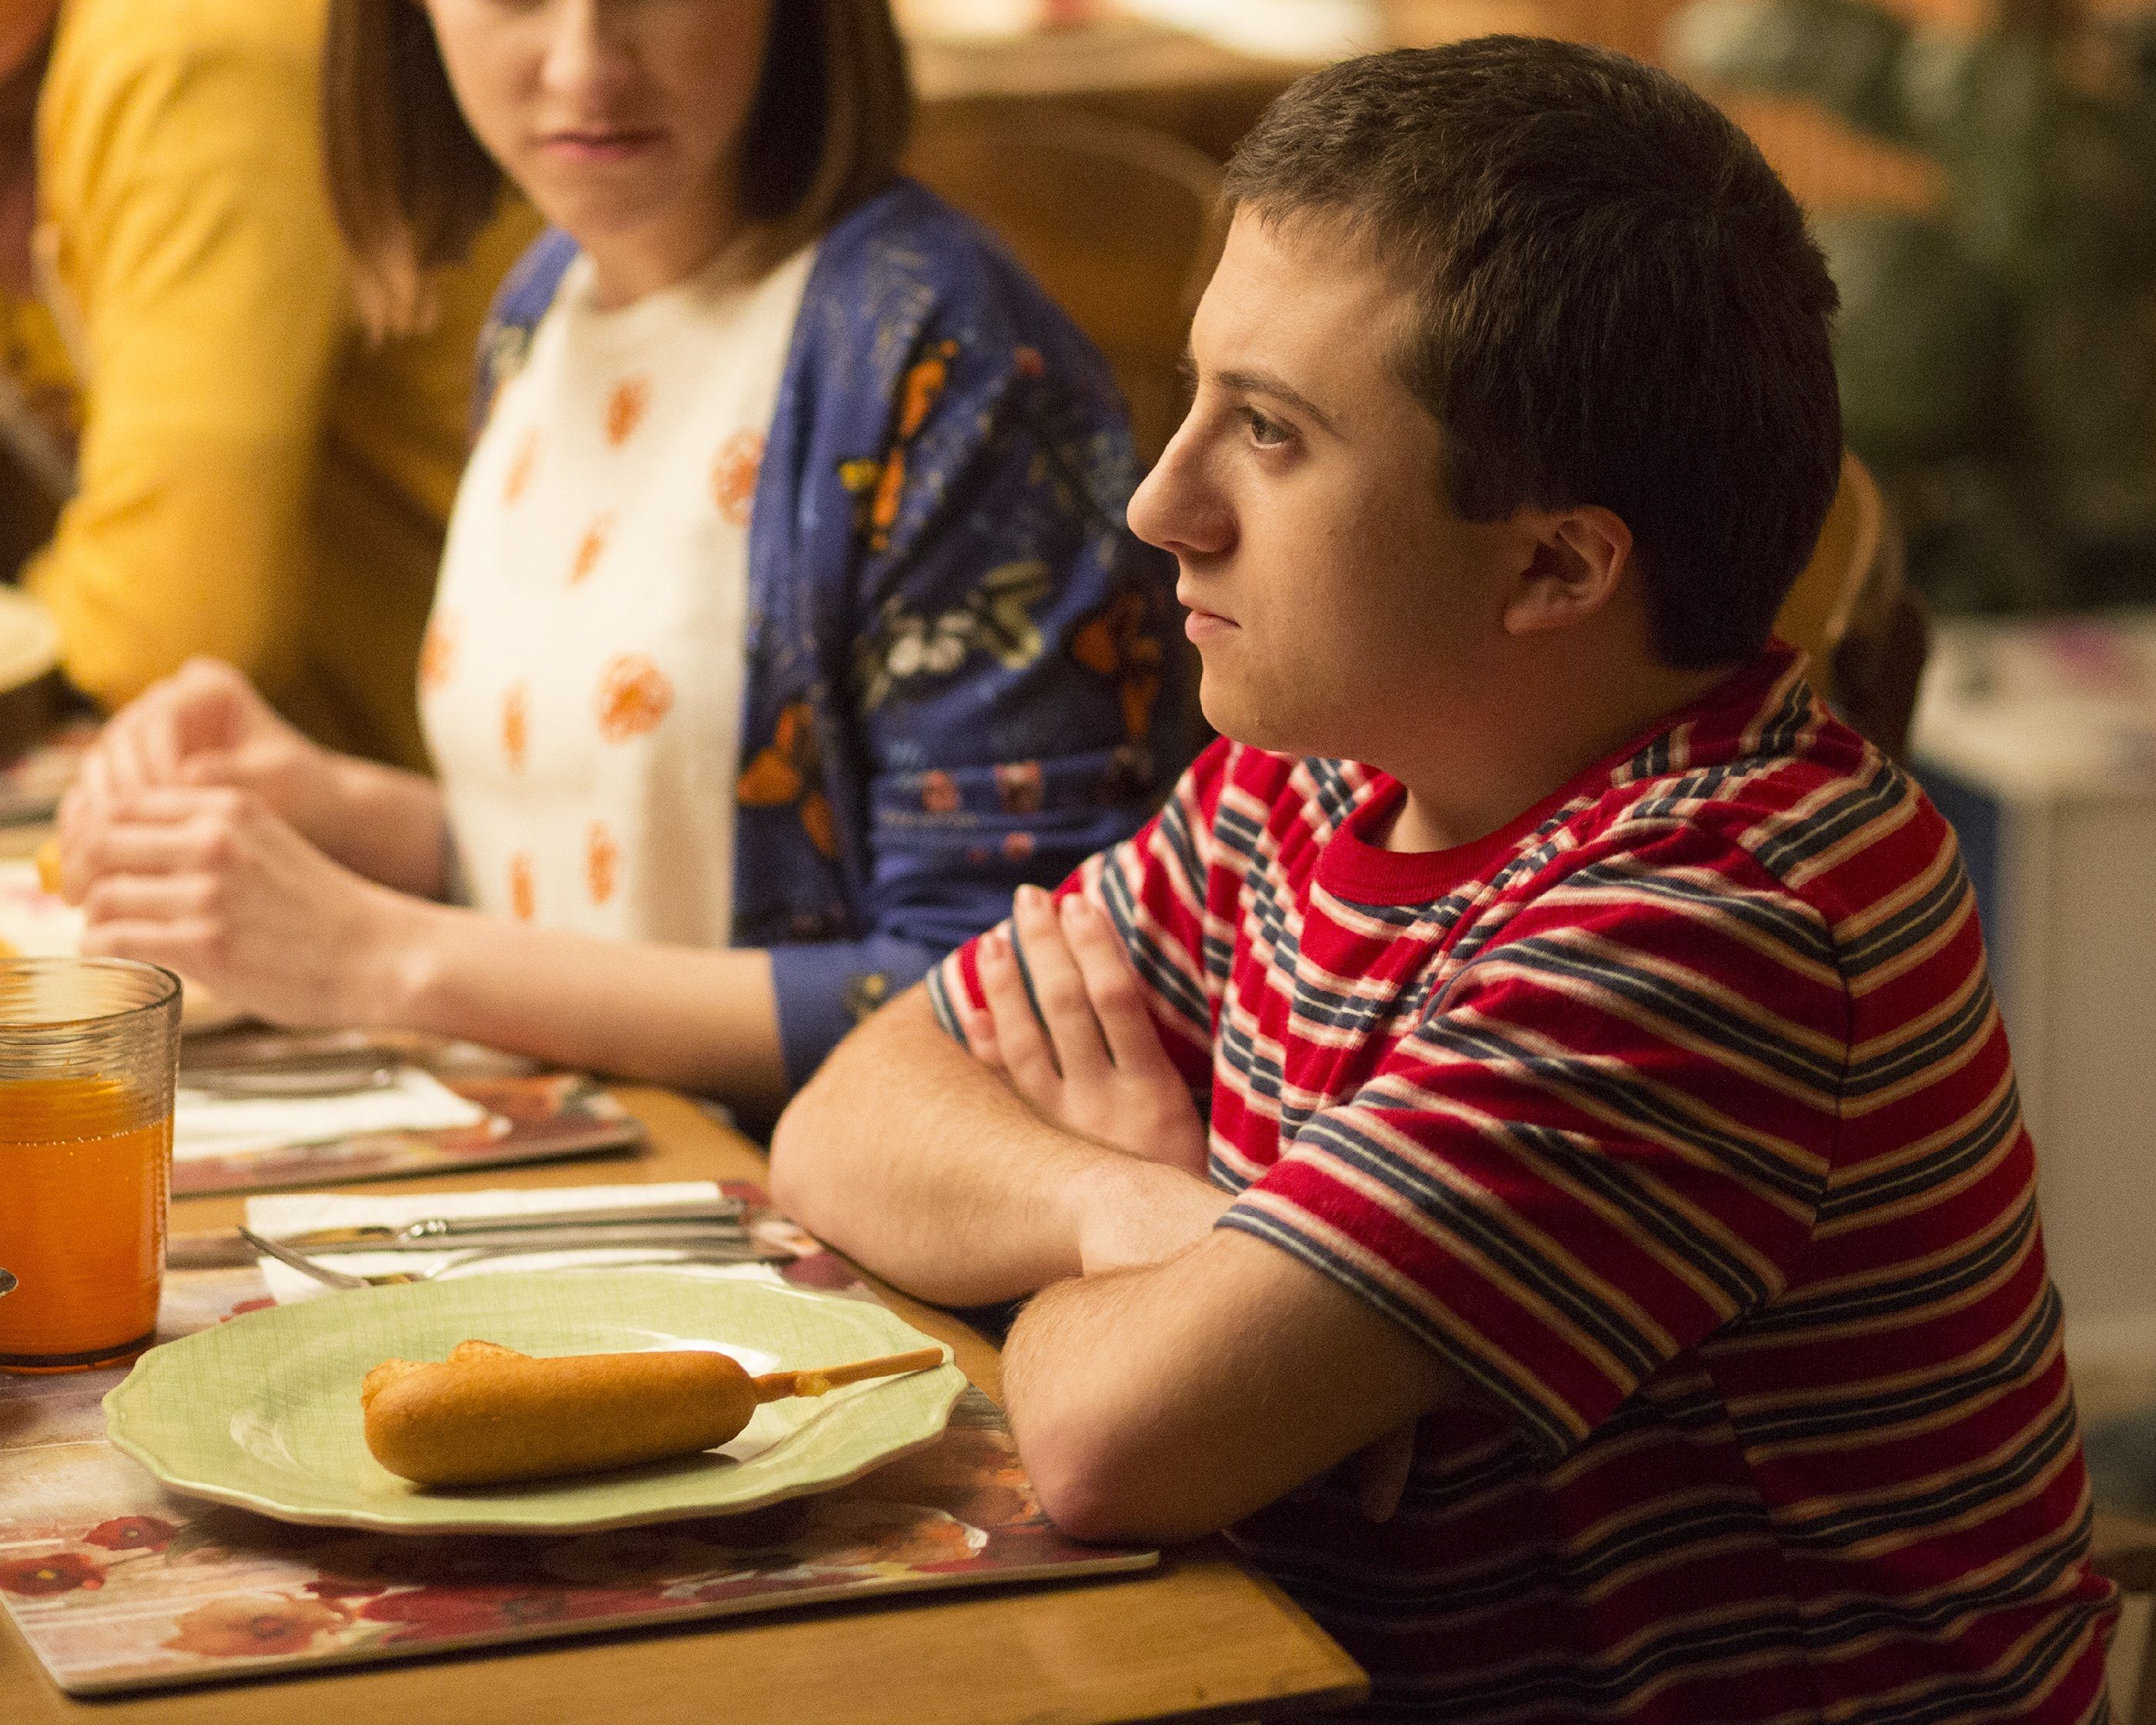 The Middle star hurt not to be cast in spin-off series